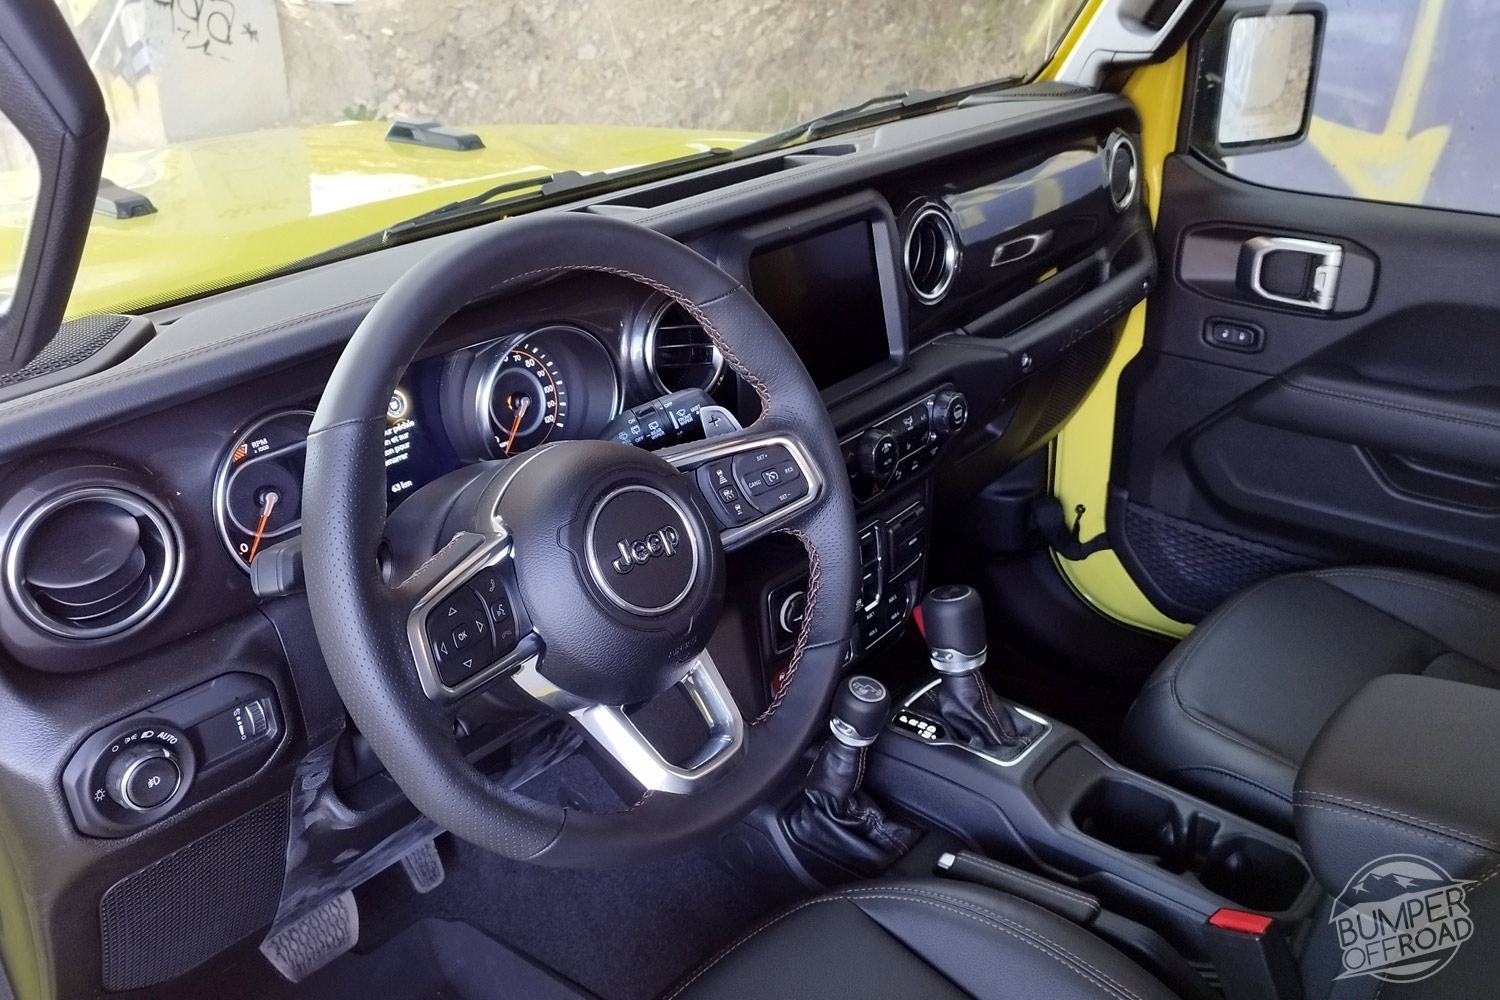 Jeep Wrangler Unlimited Rubicon V8 392 Yellow full